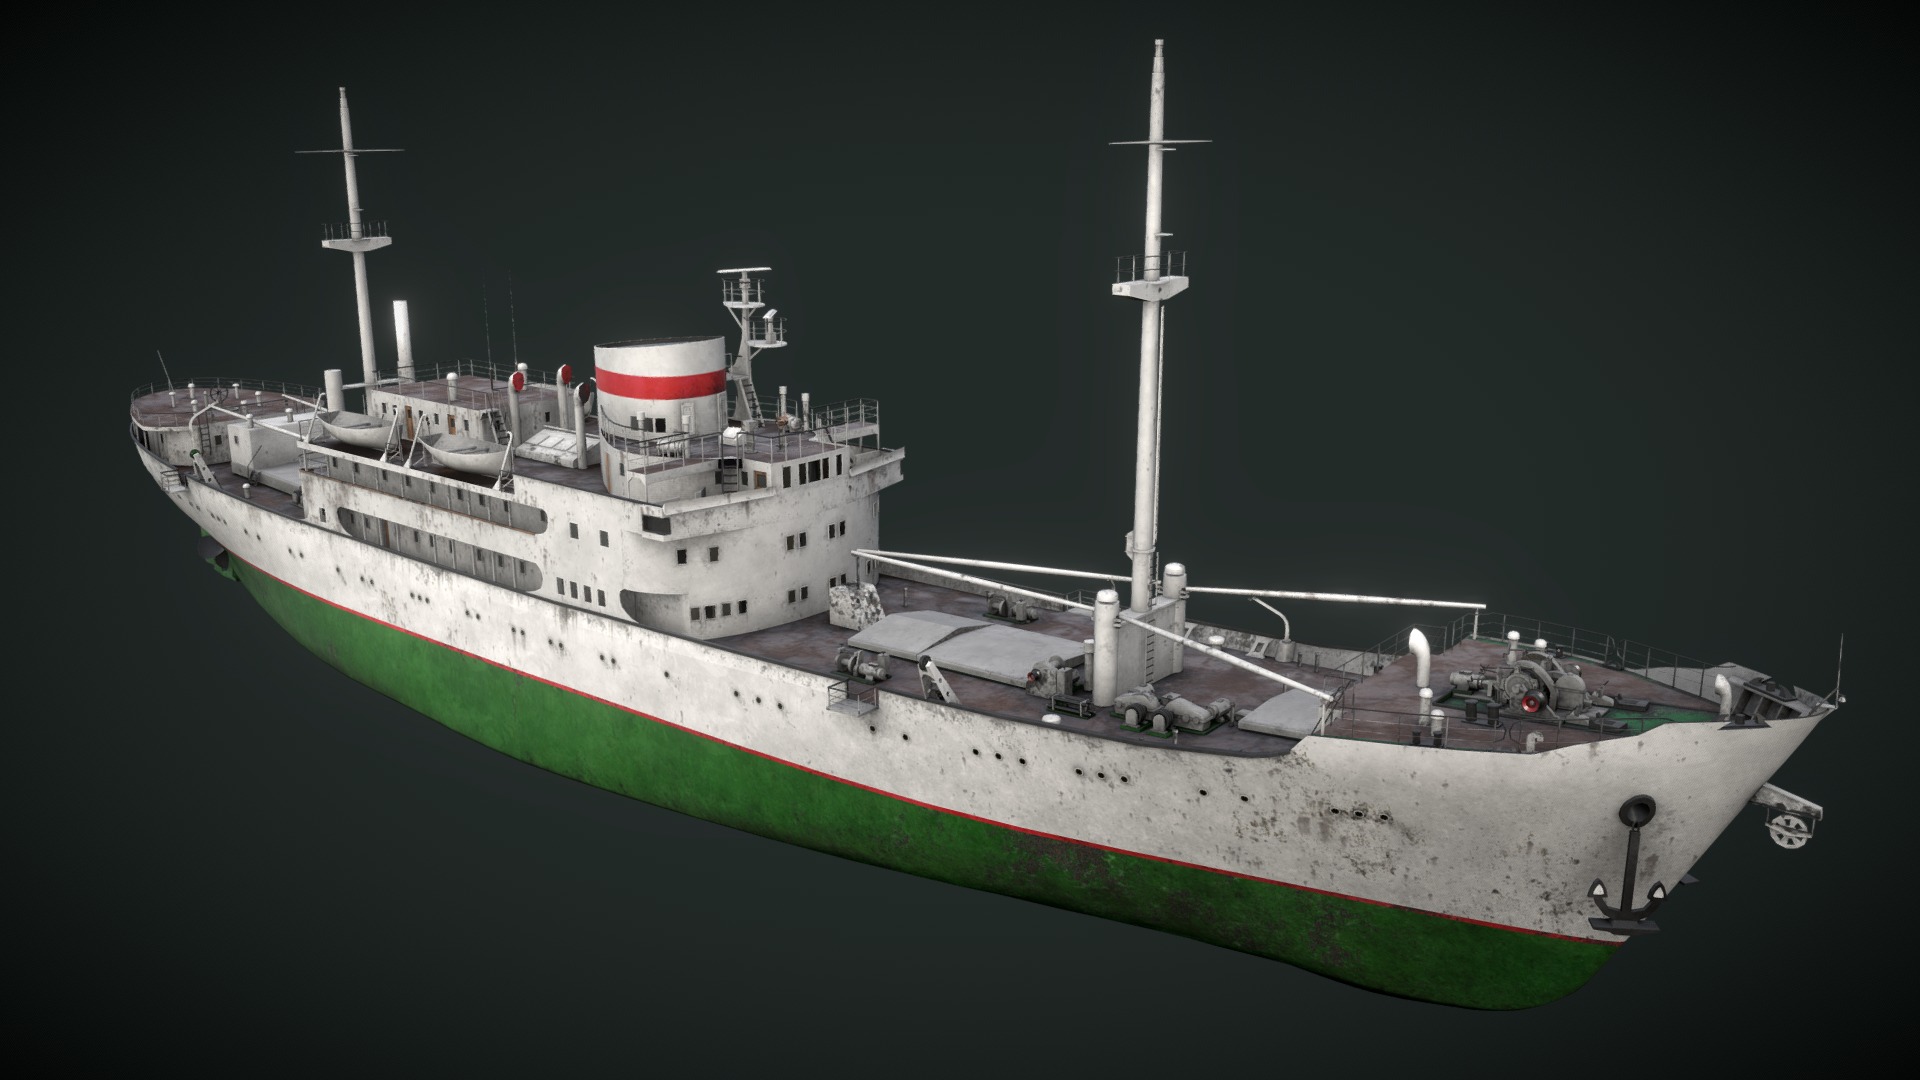 3D model Old vessel - This is a 3D model of the Old vessel. The 3D model is about a large ship in the water.